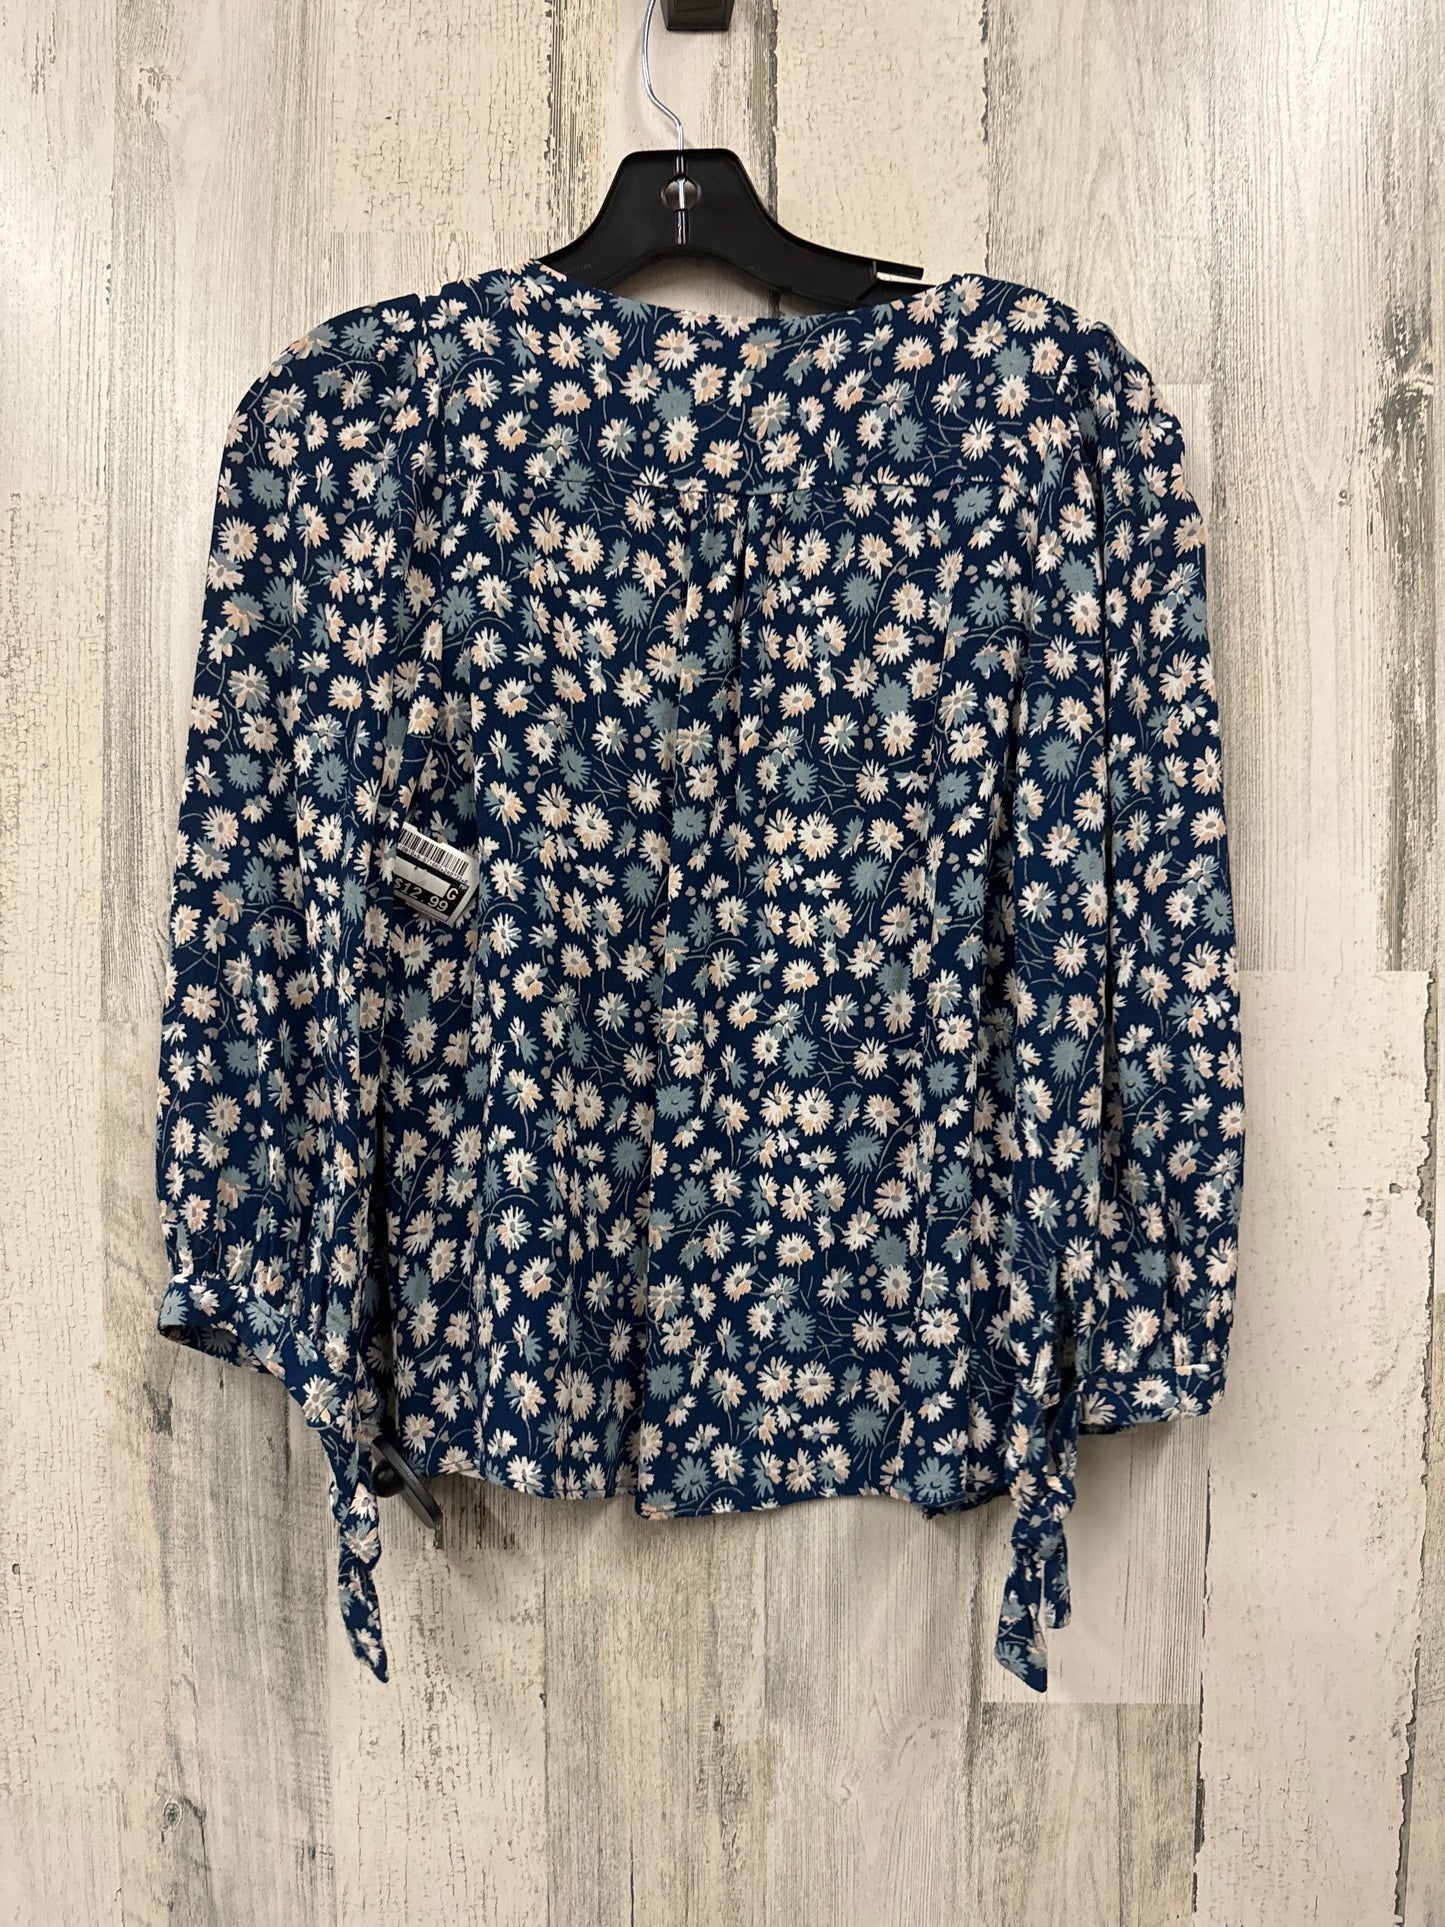 Blue Top Short Sleeve Madewell, Size Xs